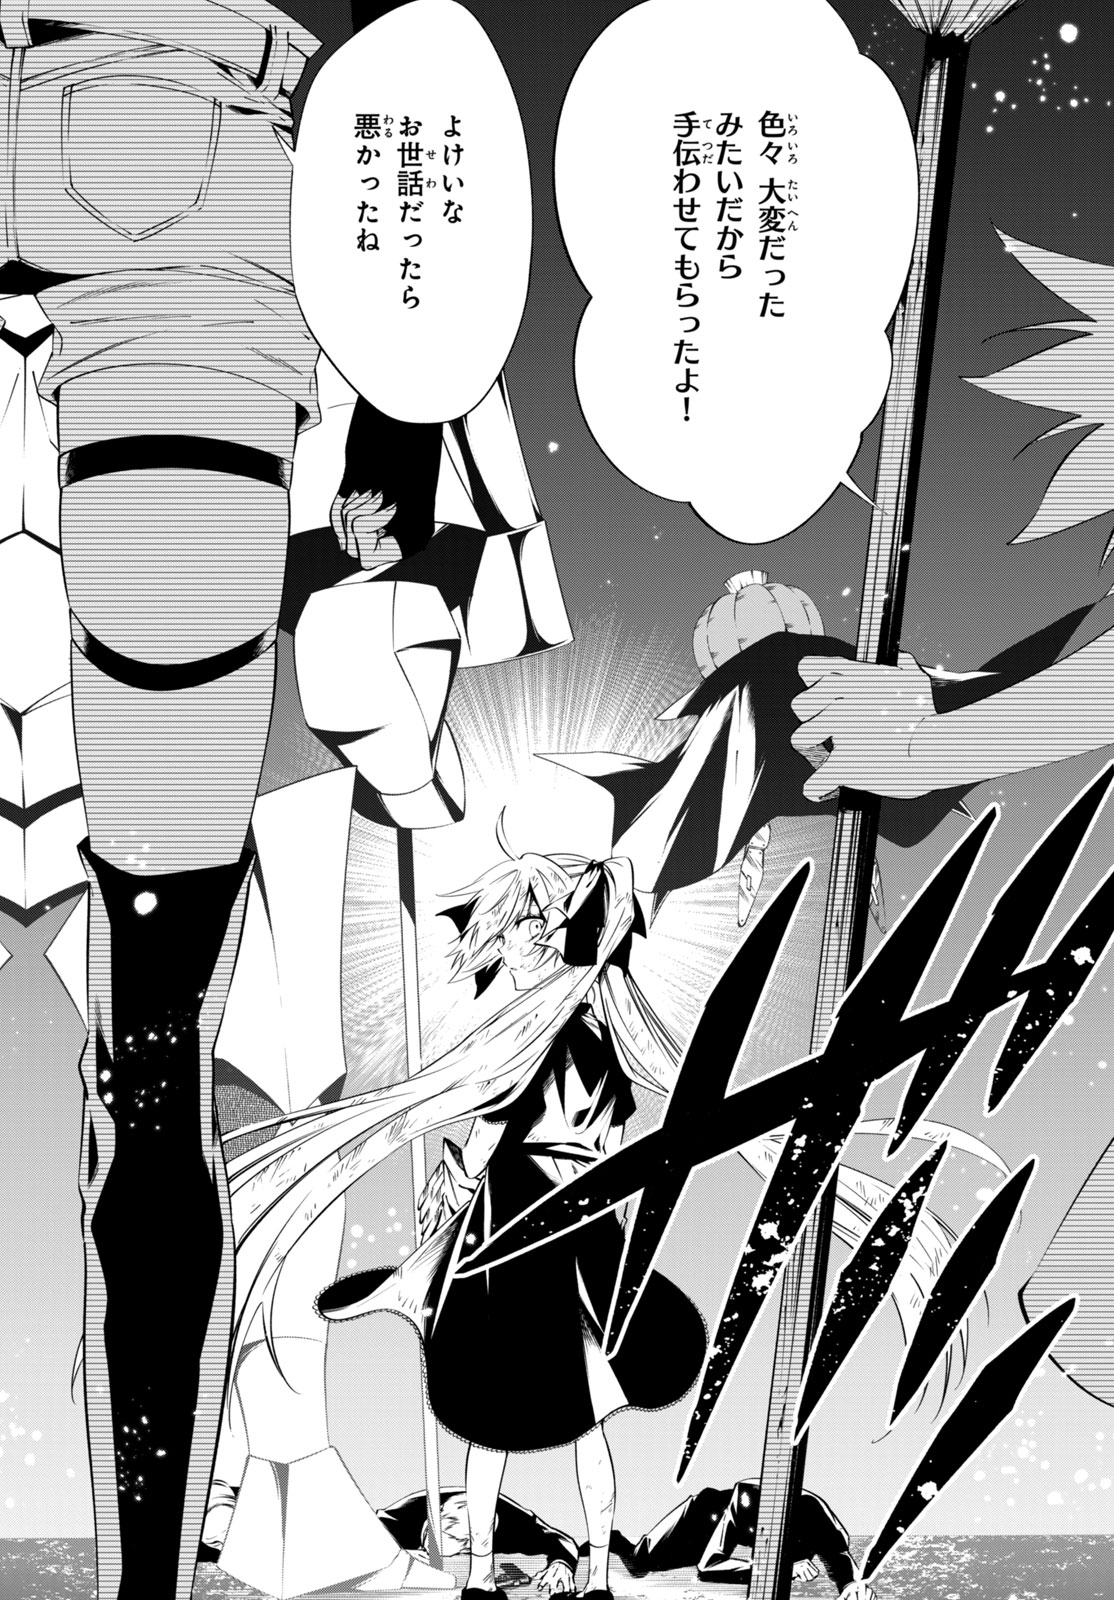 Shaman King: and a garden 第15.3話 - Page 10